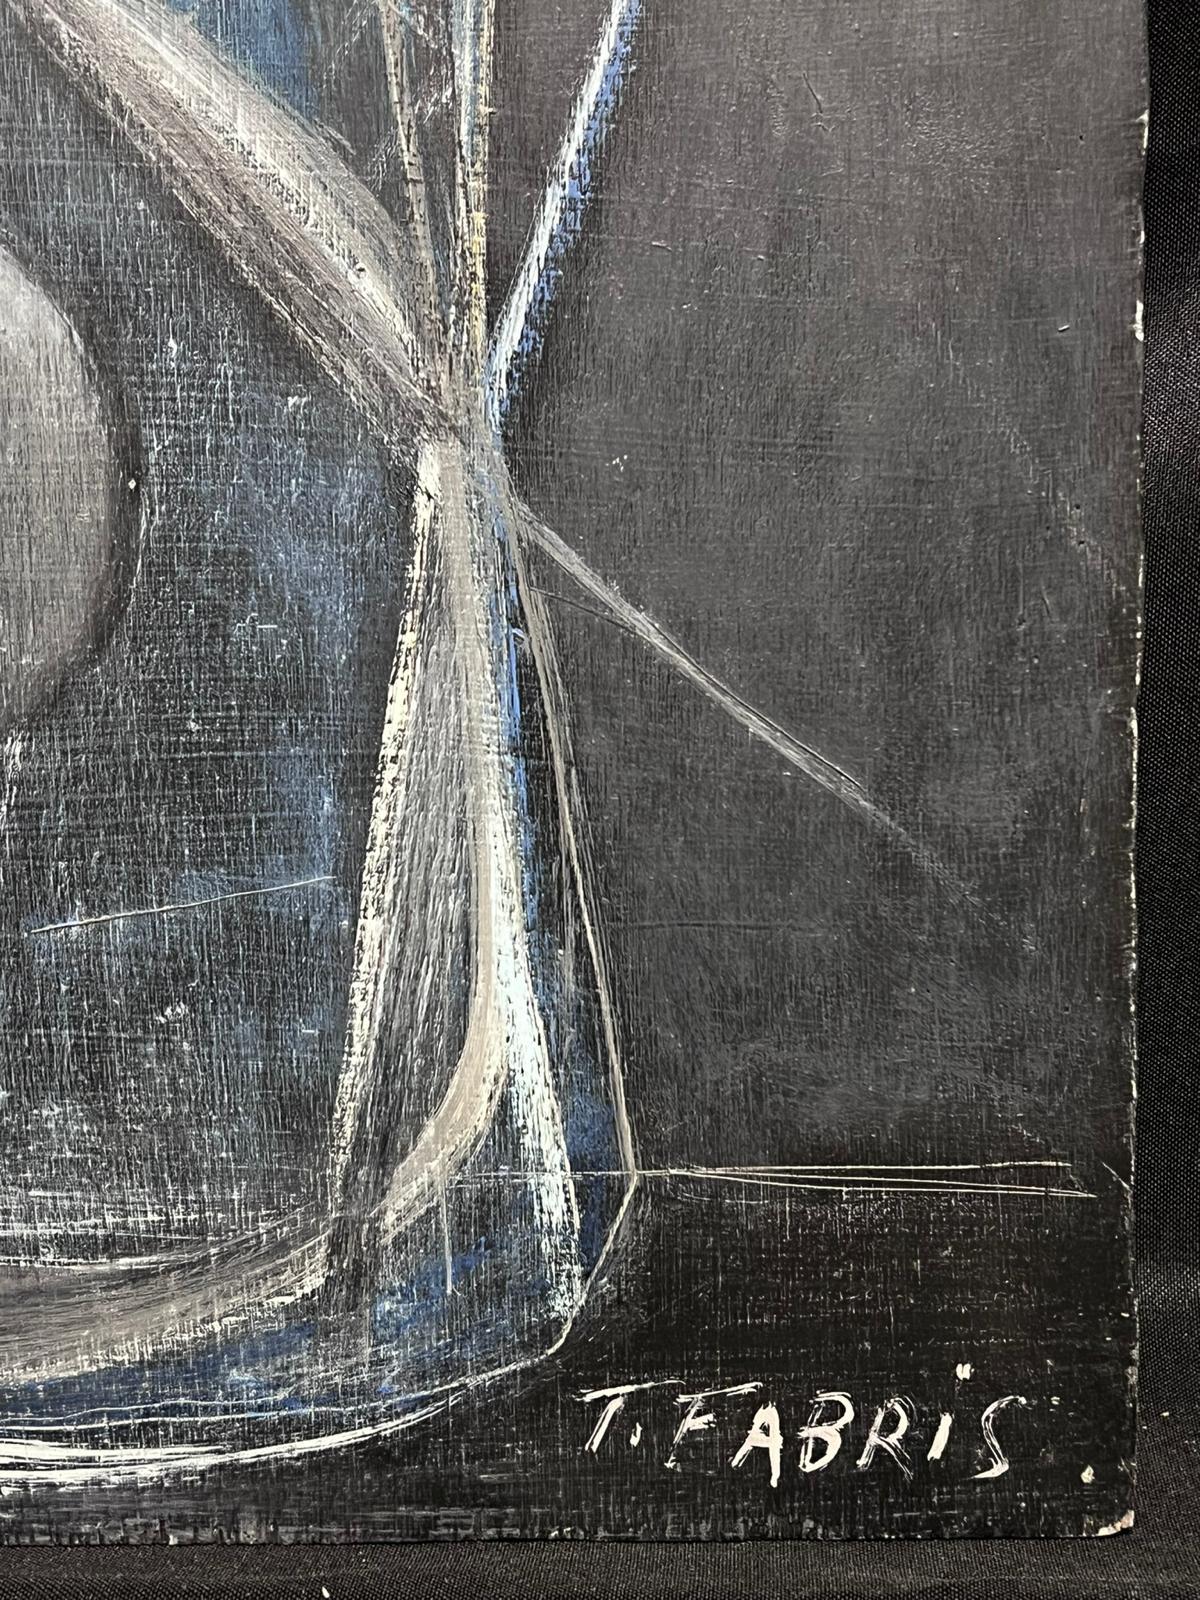 Artist/ School: French abstract, signed by T. Fabris, dated 1977

Title: Abstract Surrealist Composition

Medium: oil on board, unframed

Painting: 23 x 16 inches

Provenance: private collection, Paris

Condition: The painting is in overall very